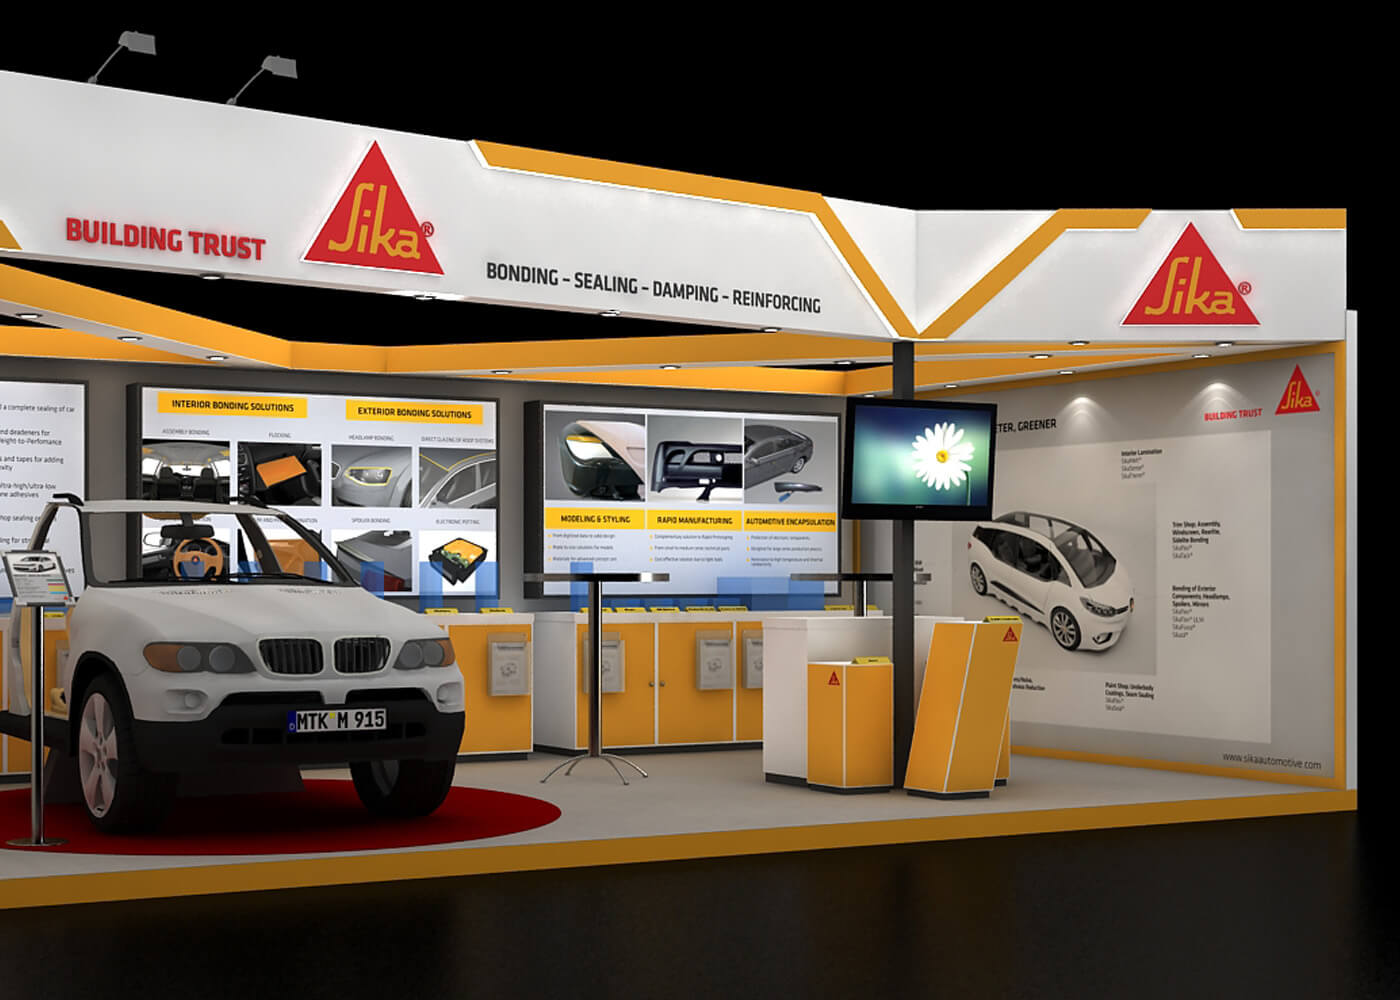 Exhibition booth design services by 4AM